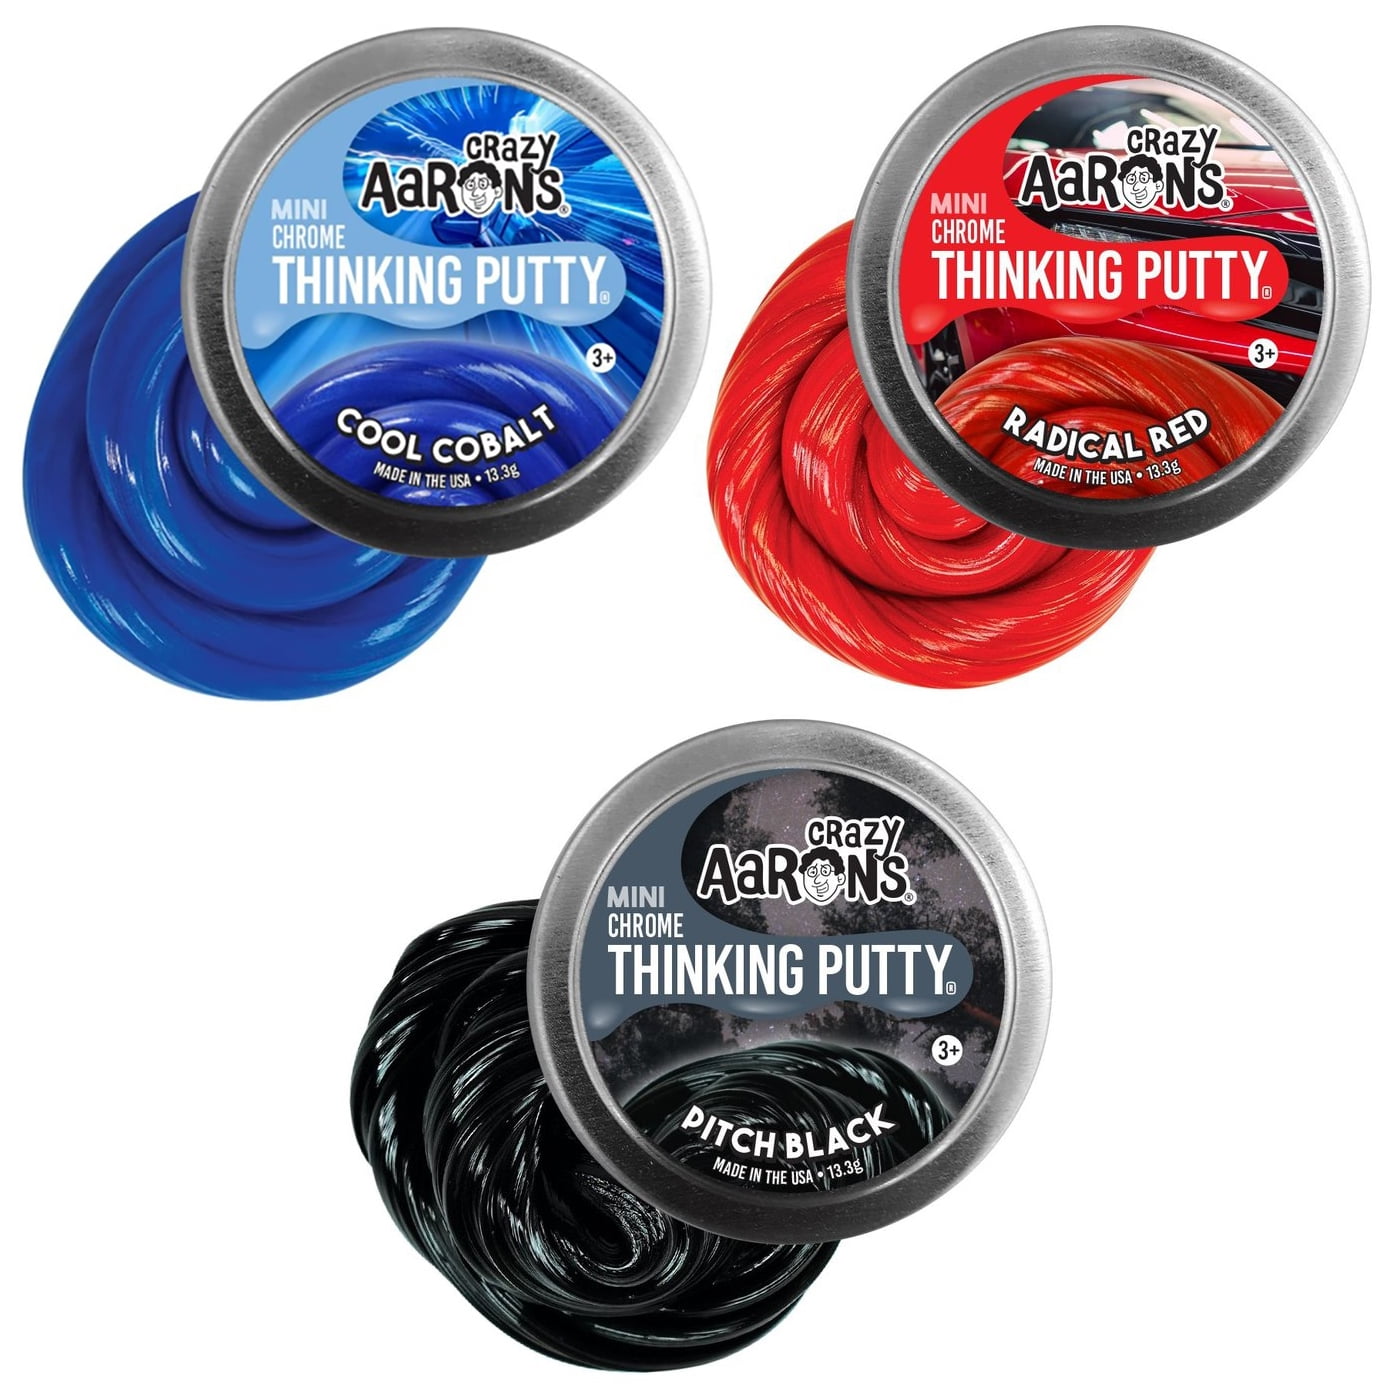 Crazy Aaron's Thinking Putty Mini Tin Complete Bundle Gift Set 2 PACK 2" tins 